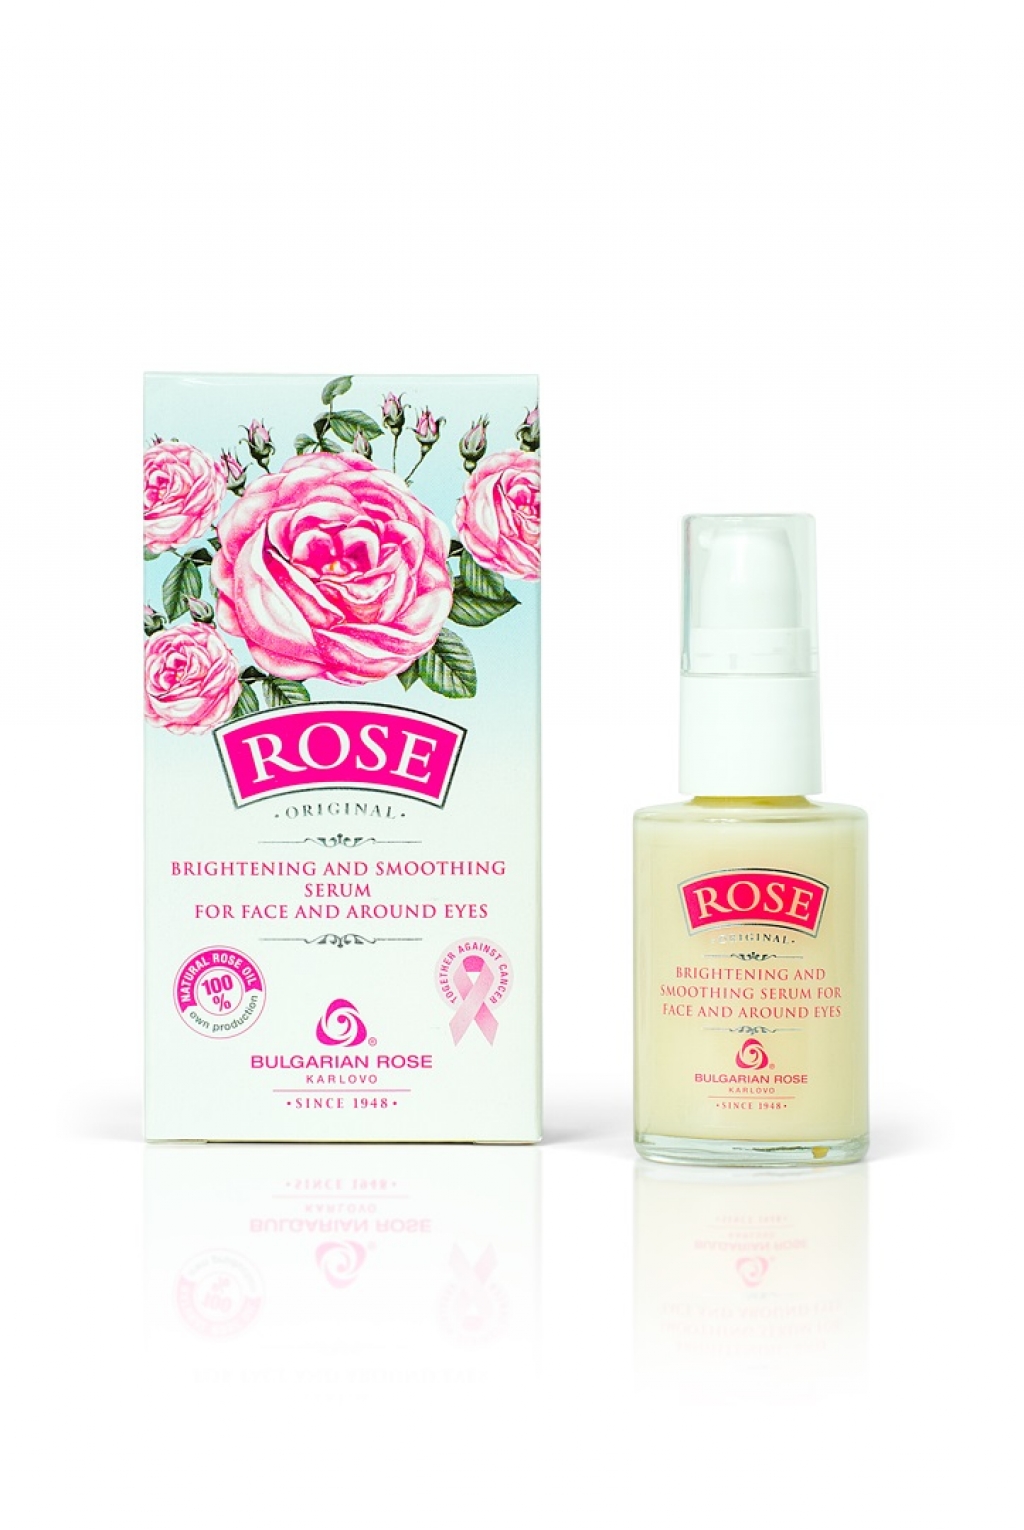 Rose Original brightening and smoothing serum for face and around